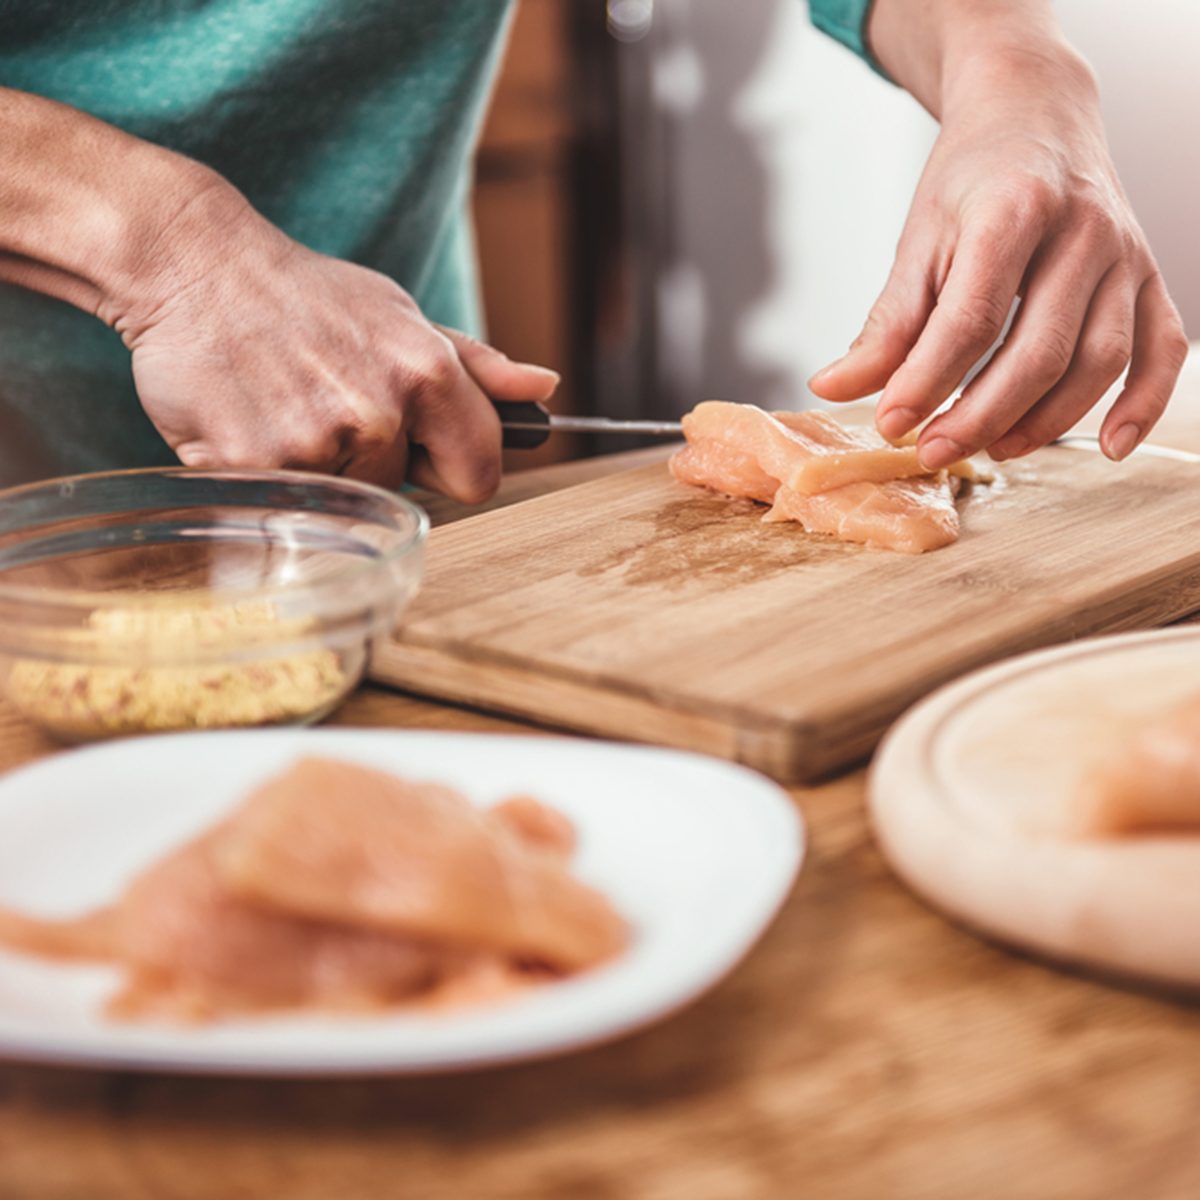 Raw Chicken 8 Cooking Mistakes You Might Be Making Taste